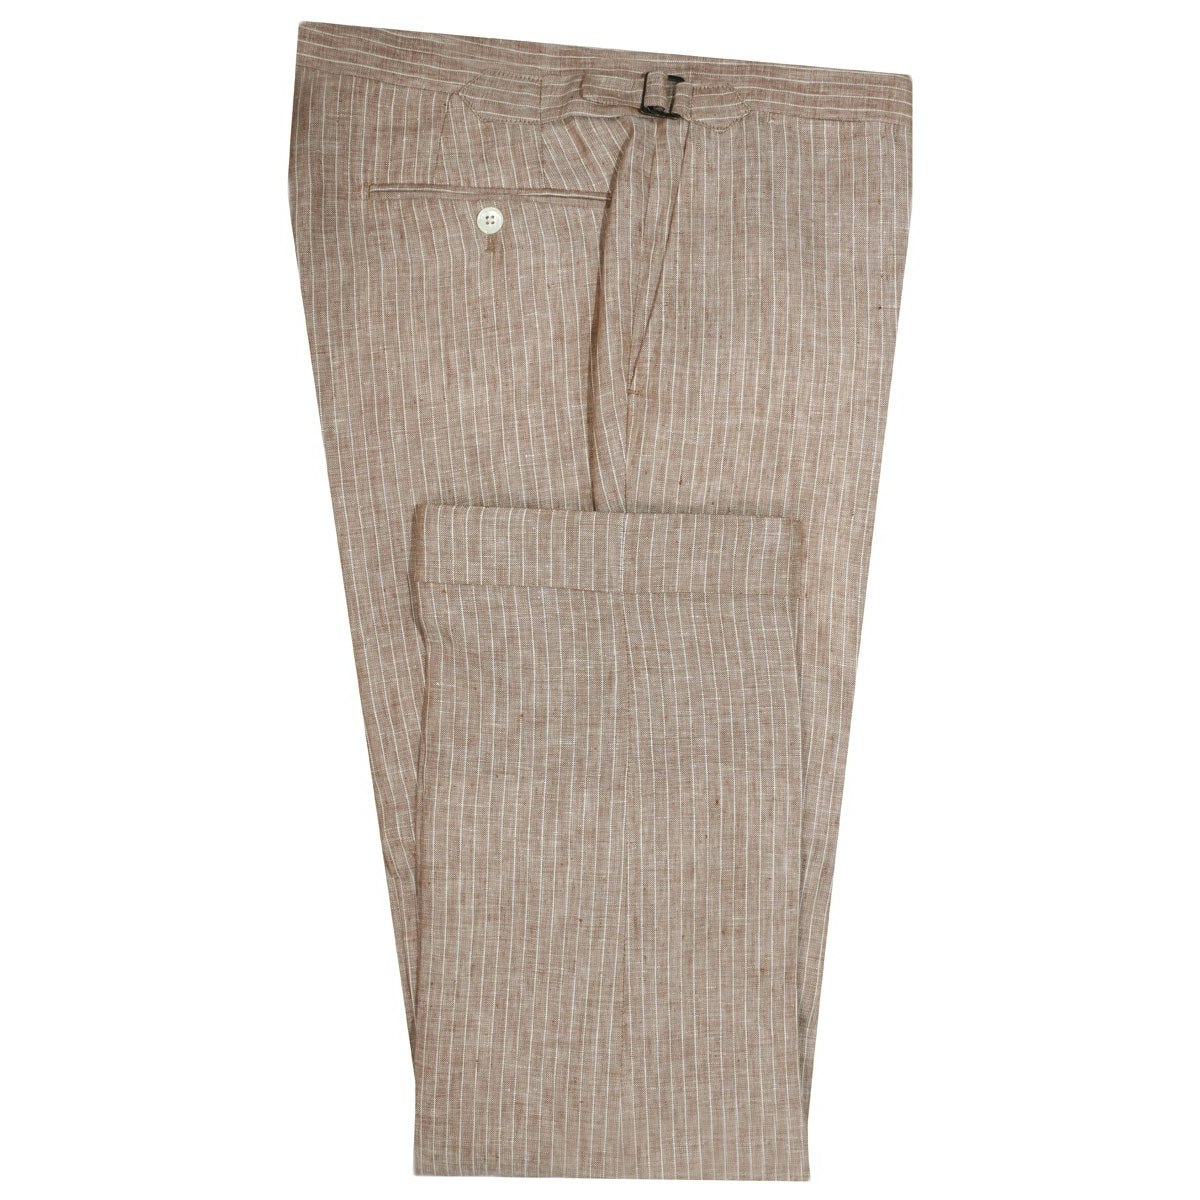 InStitchu Collection The Gatsby Beige Linen Pants